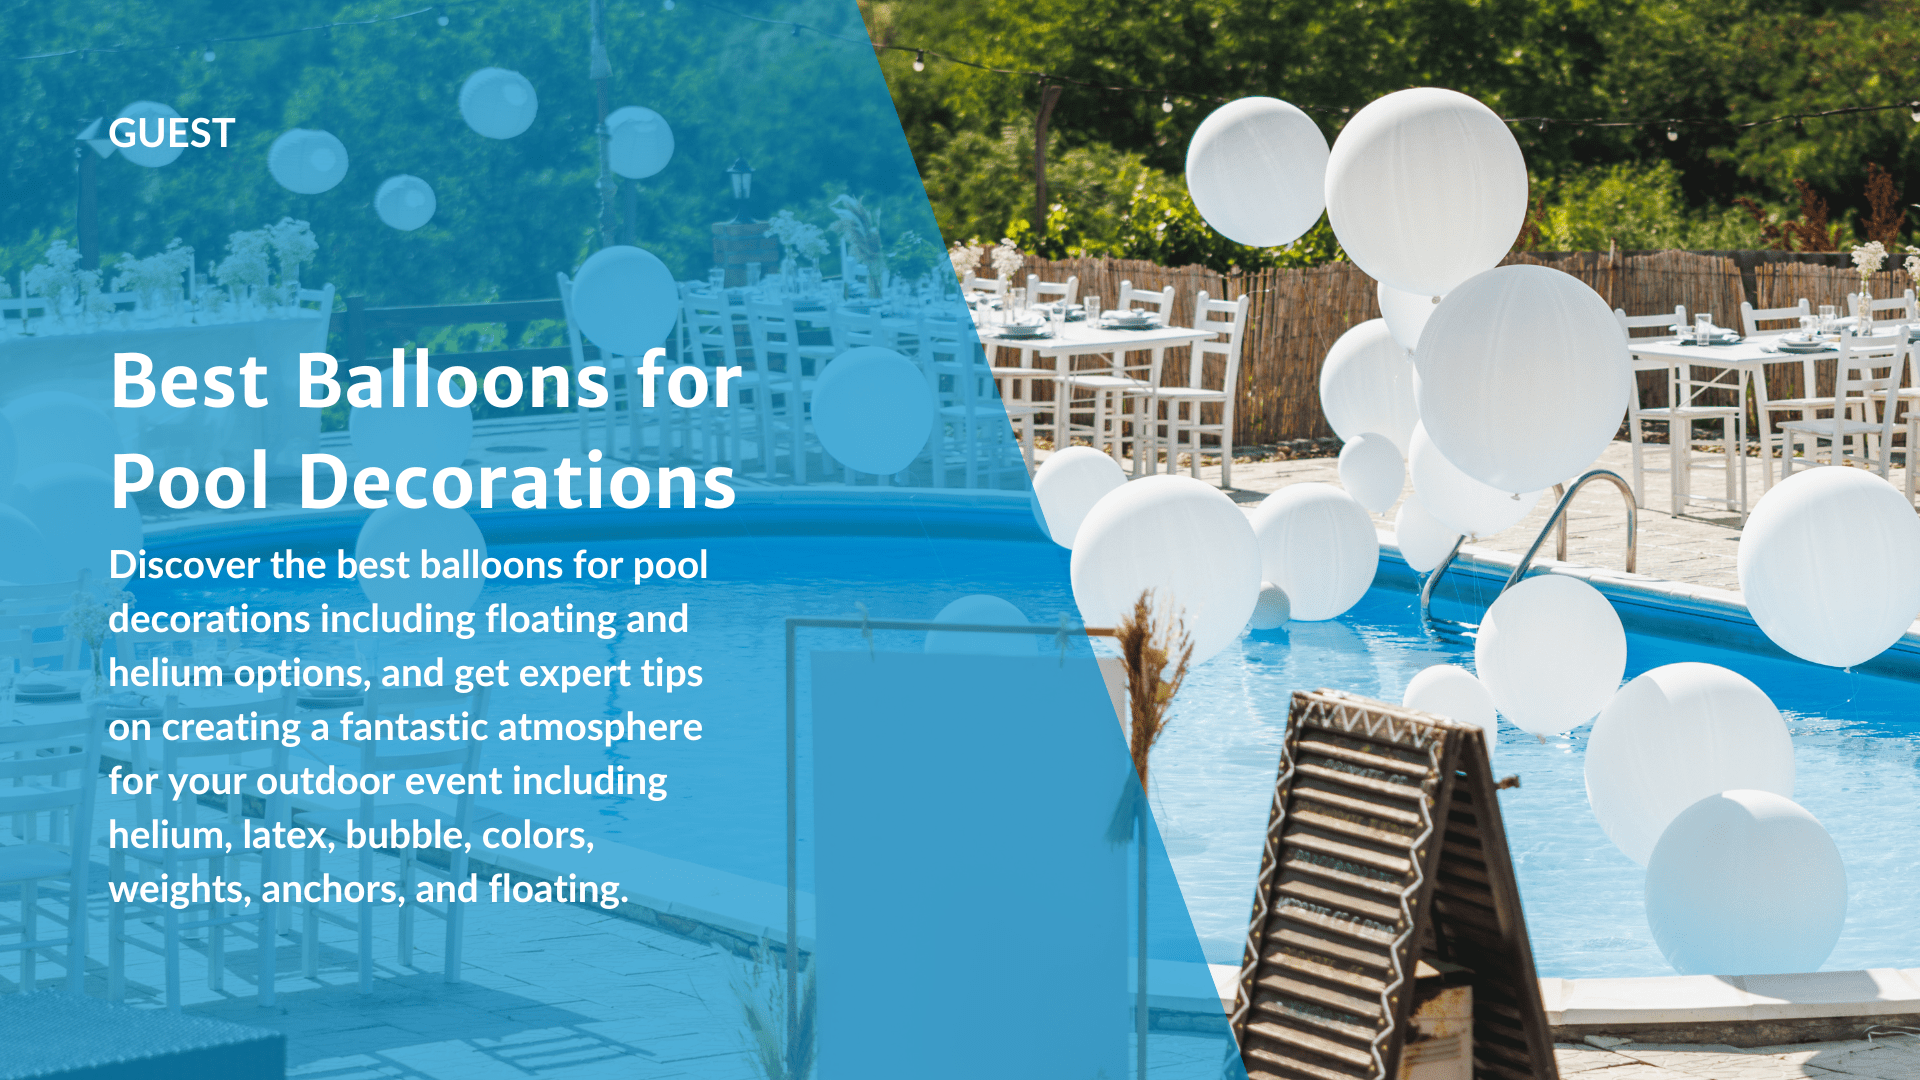 Best Balloons for Pool Decorations Including Floating and Helium